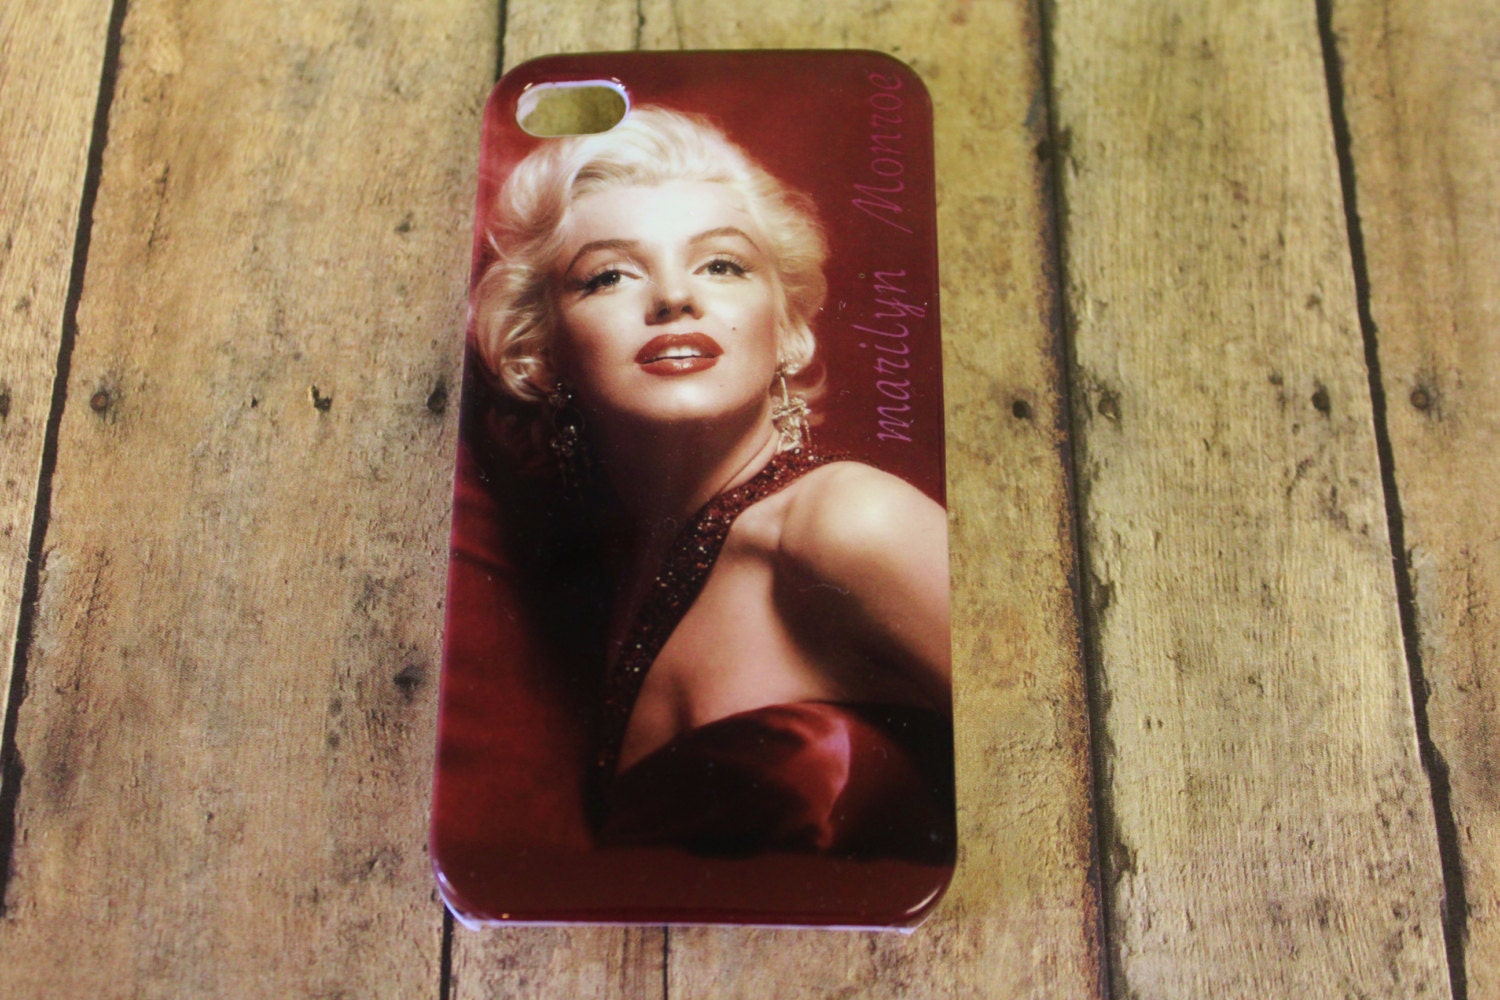 marilyn monroe, celebrity, girl, famous, star, orange colorful, bright iphone 4/4s case/cover hard case - Hot2Own